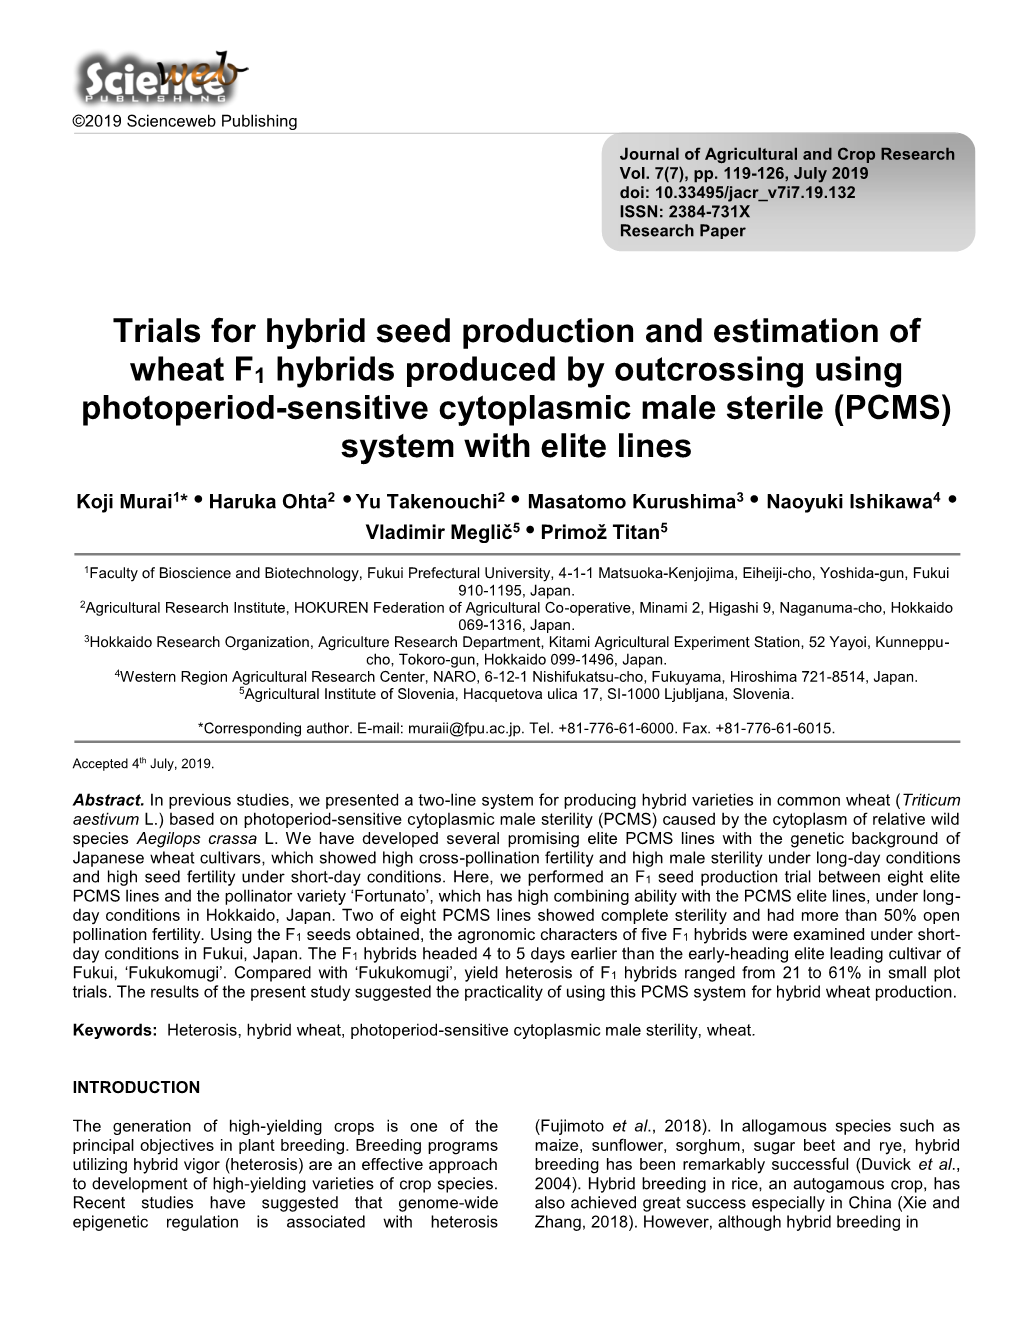 Trials for Hybrid Seed Production and Estimation of Wheat F1 Hybrids